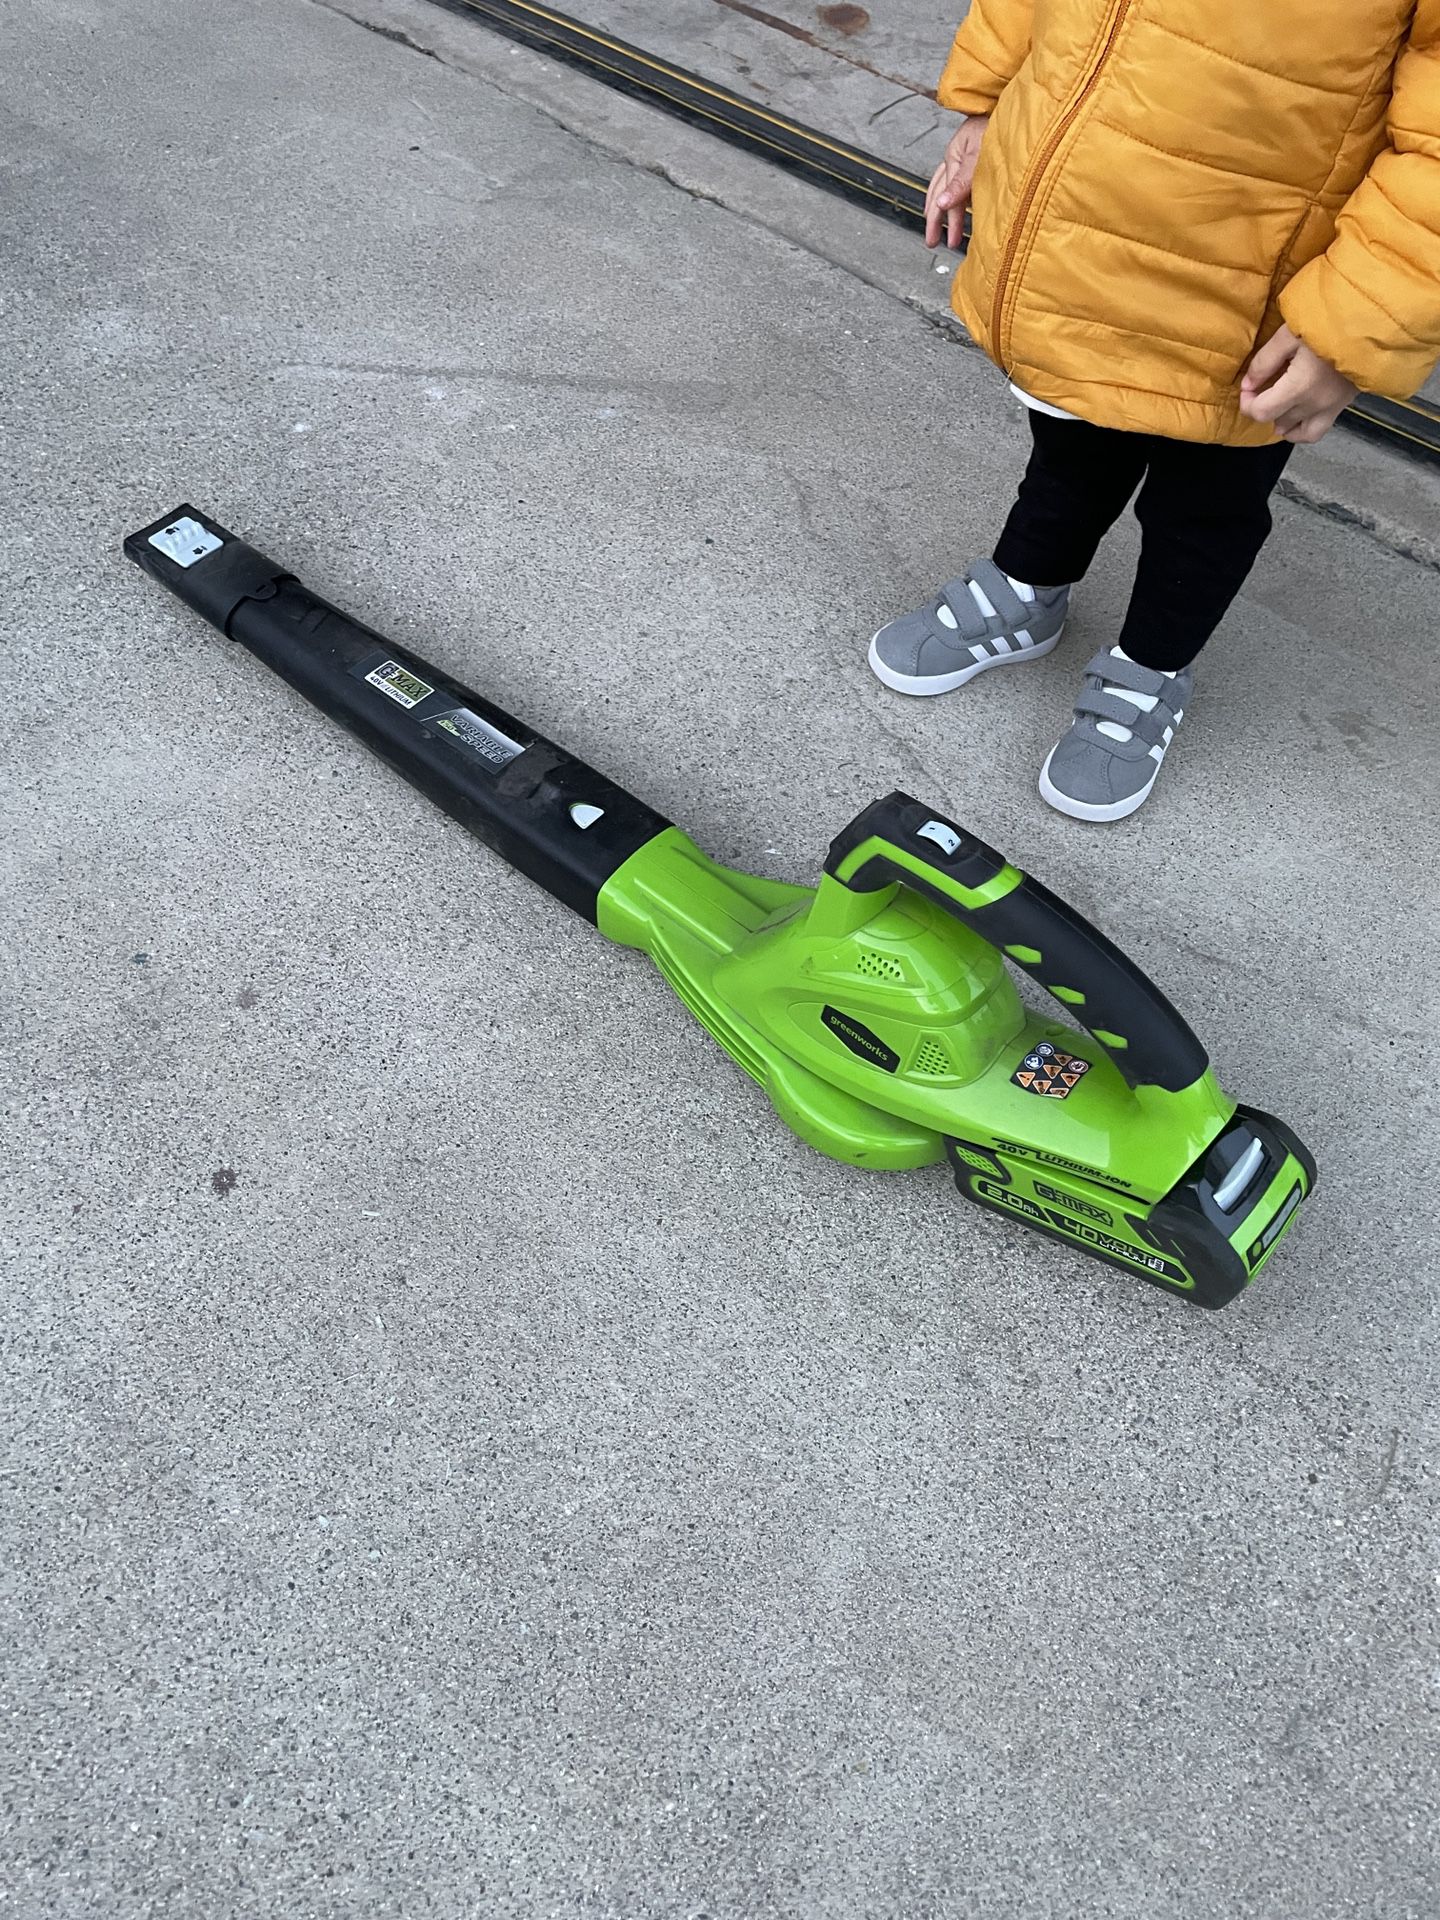 Greenworks Leaf Blower with battery and charger